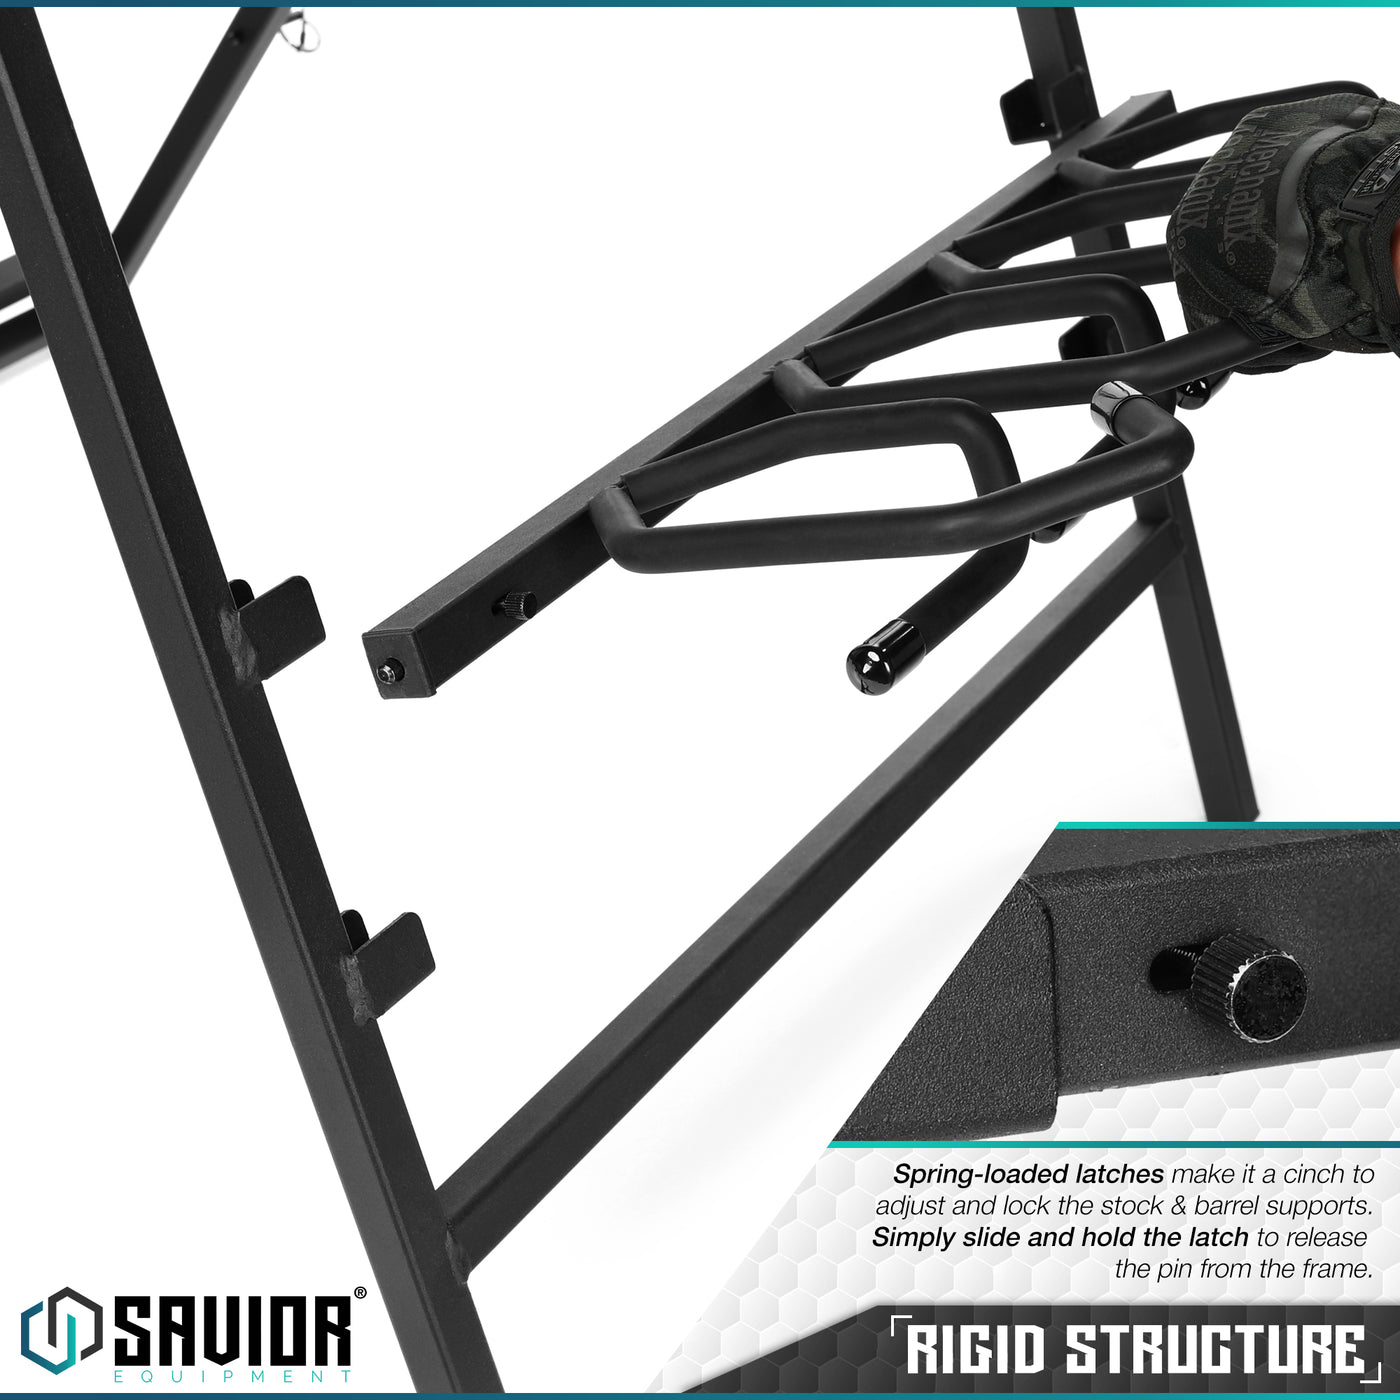 Rigid Structure - Spring-loaded latches make it a cinch to adjust and lock the supports. Simply slide and hold the latch to lease the pin from the frame.